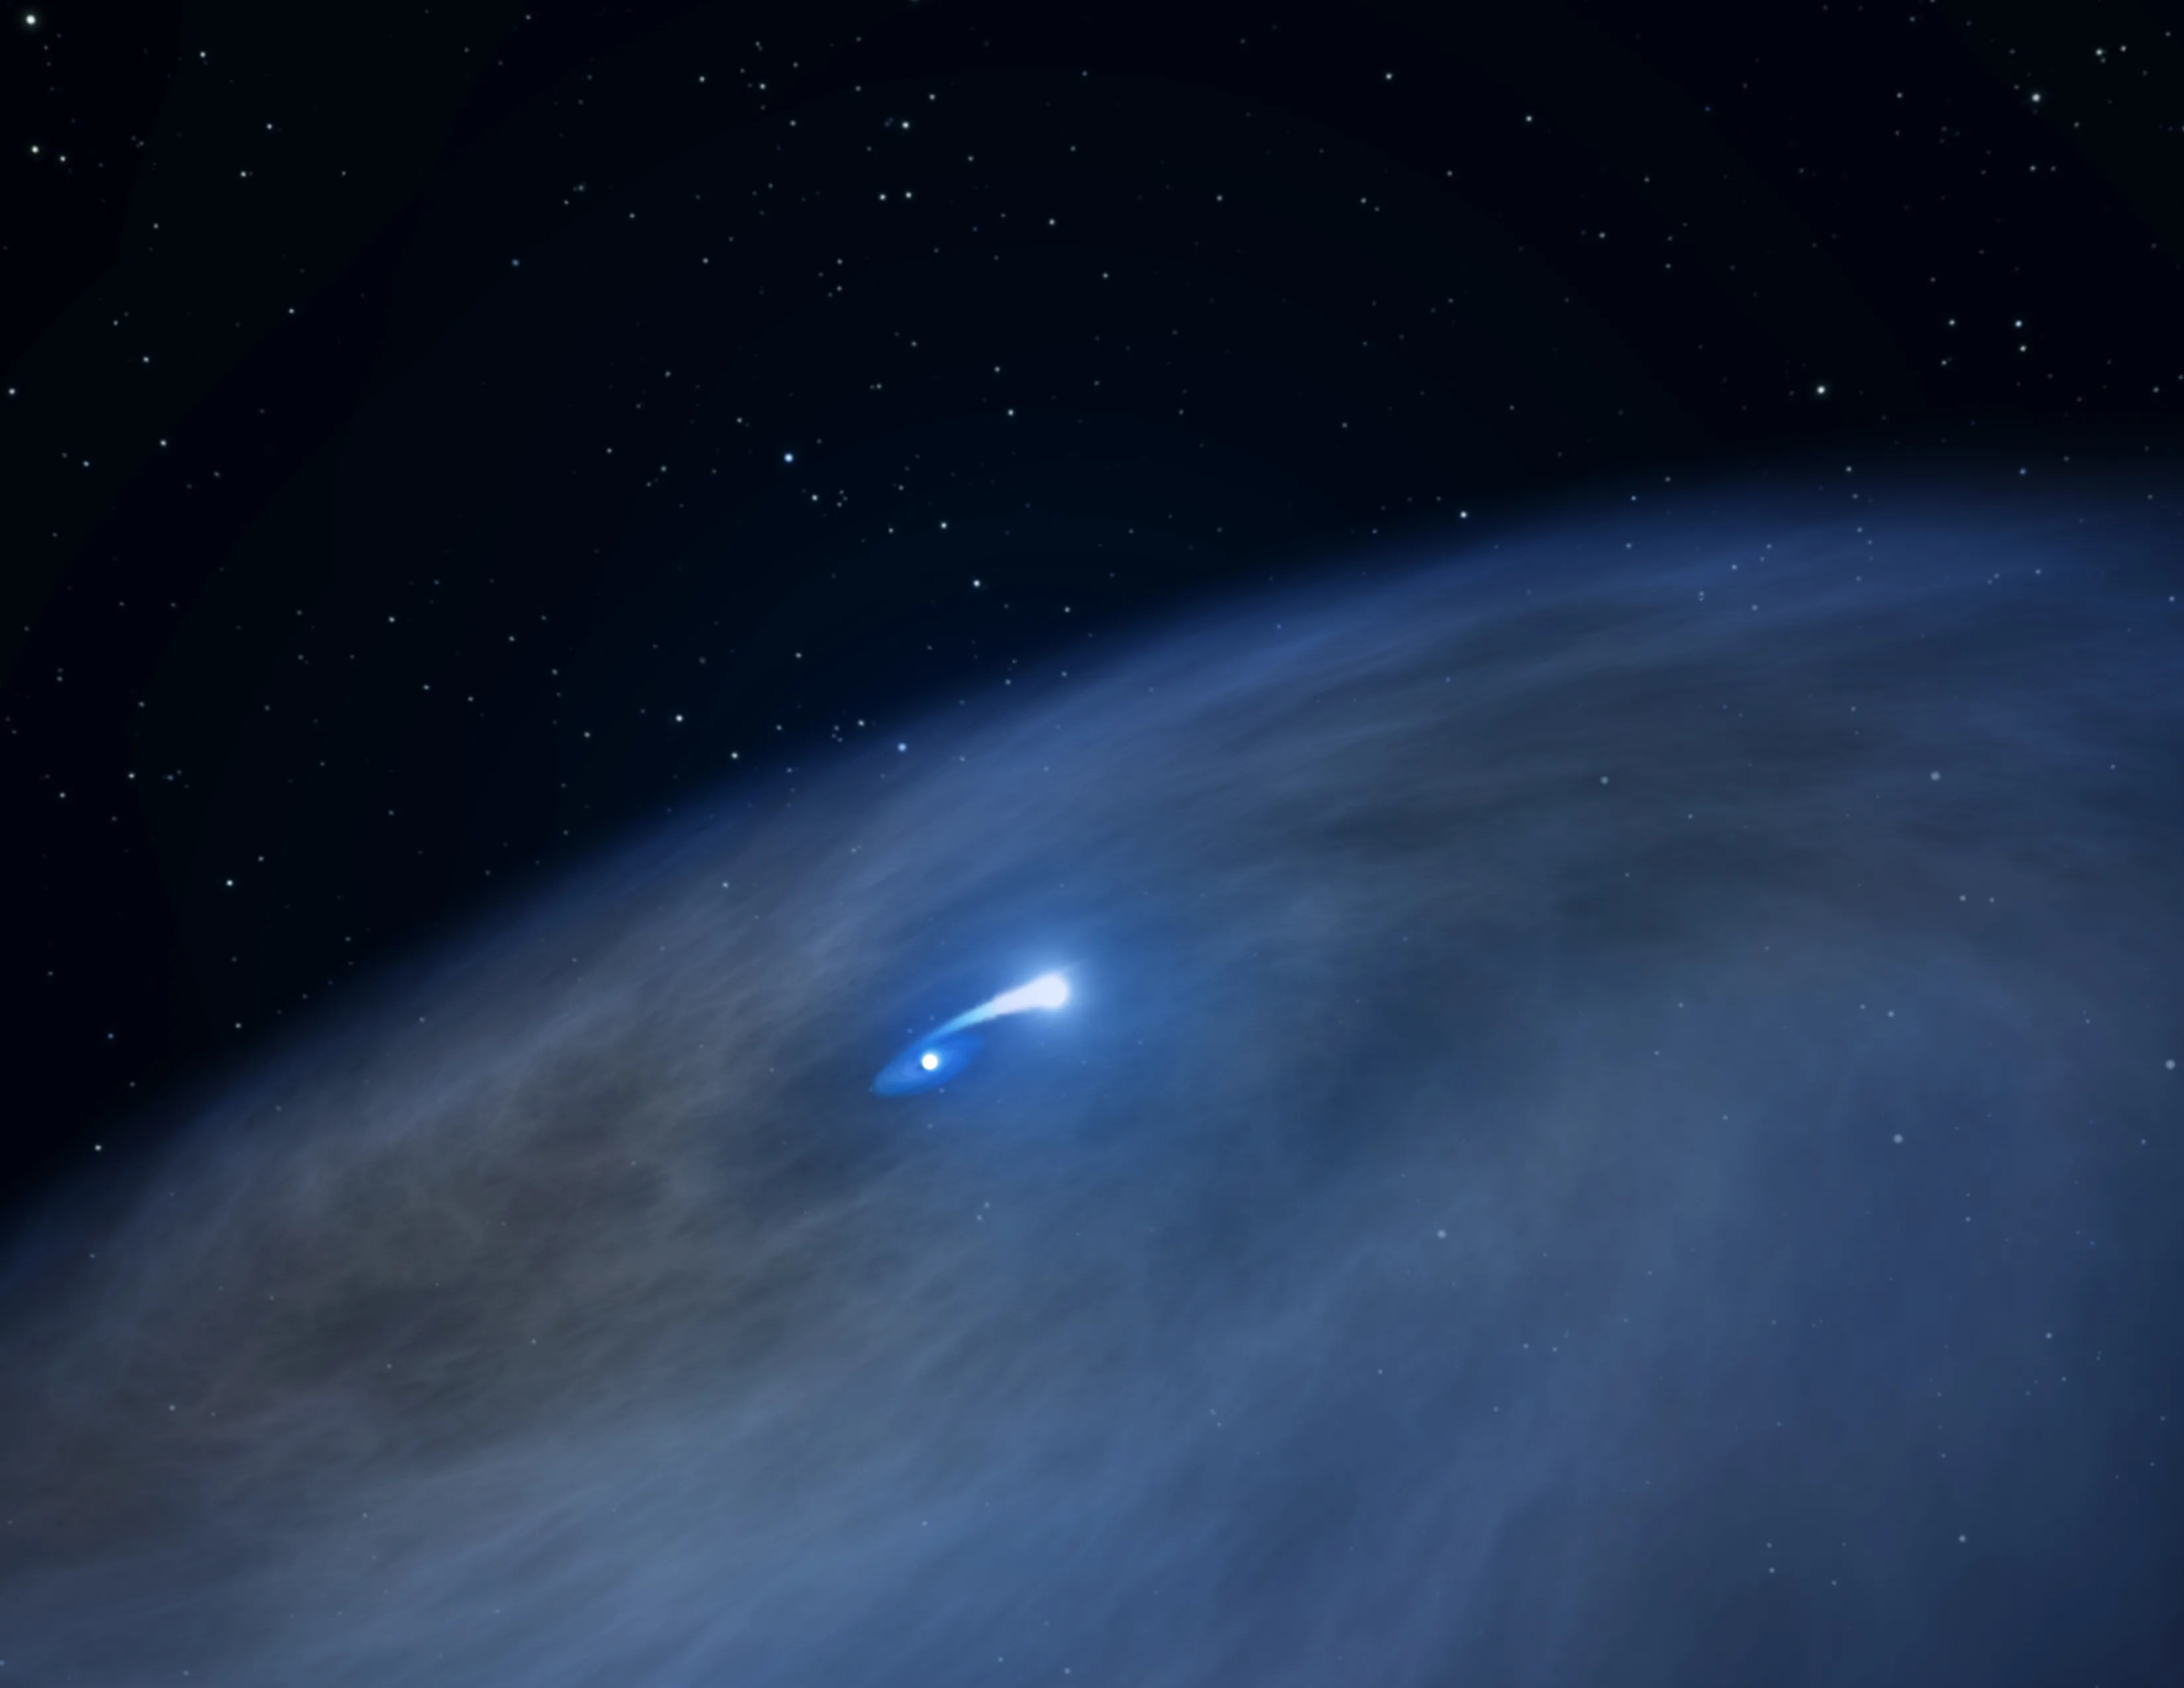 A disk of blue-gray dust swirls around a bright blue central point of light, against a dark field of stars